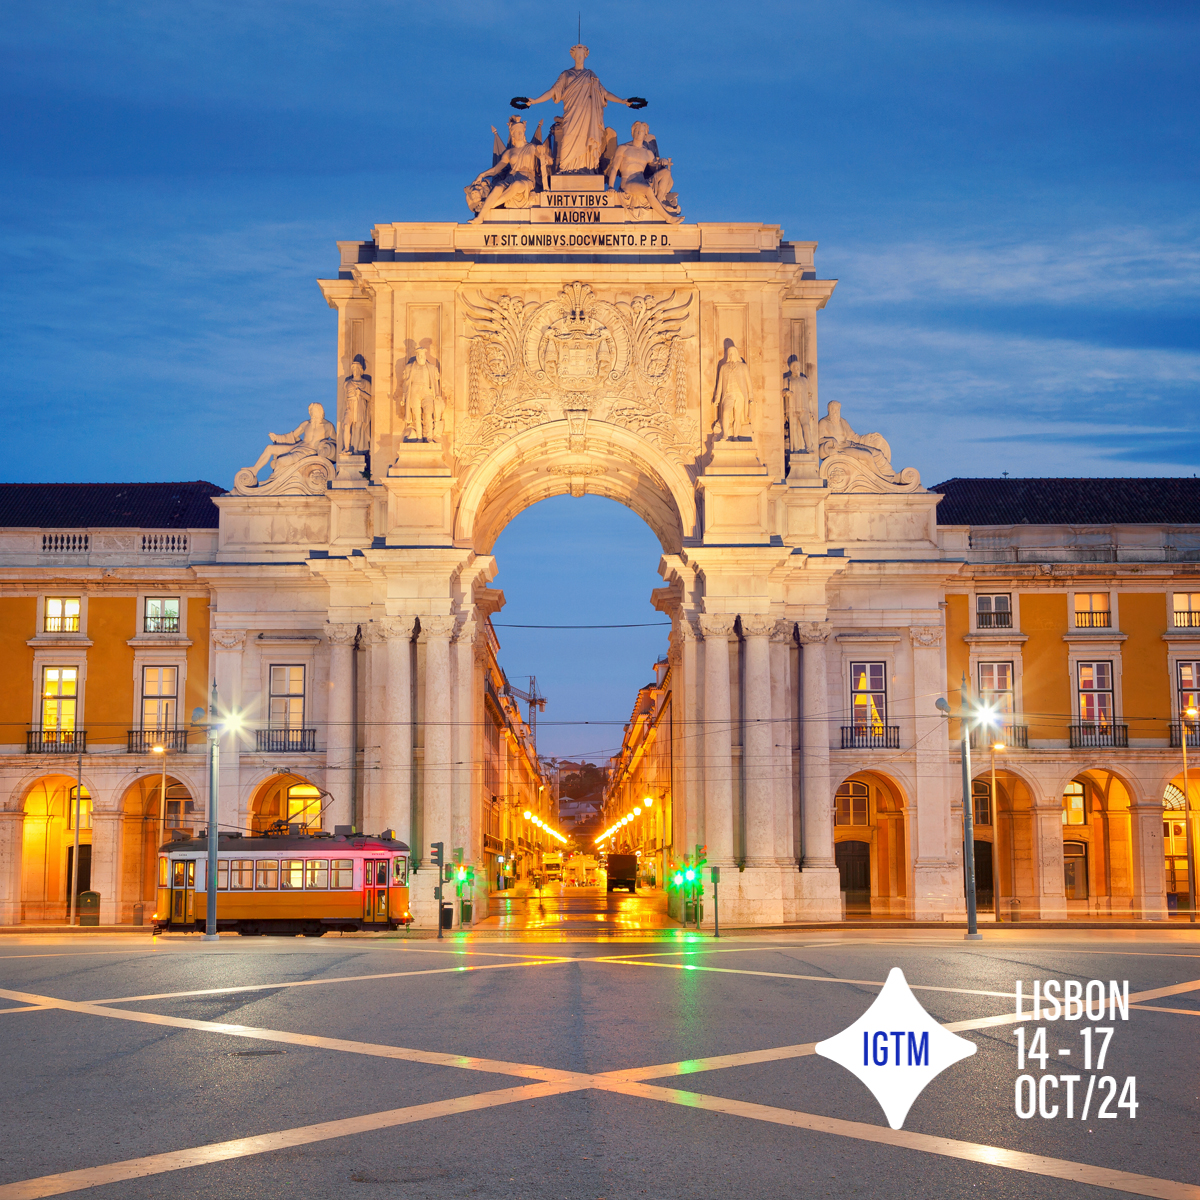 Destination: Lisbon 🇵🇹 Our beautiful host city, where the golf travel industry will meet for this year's IGTM. Will you be there to showcase your business and network with crucial individuals and organisations? igtmarket.com